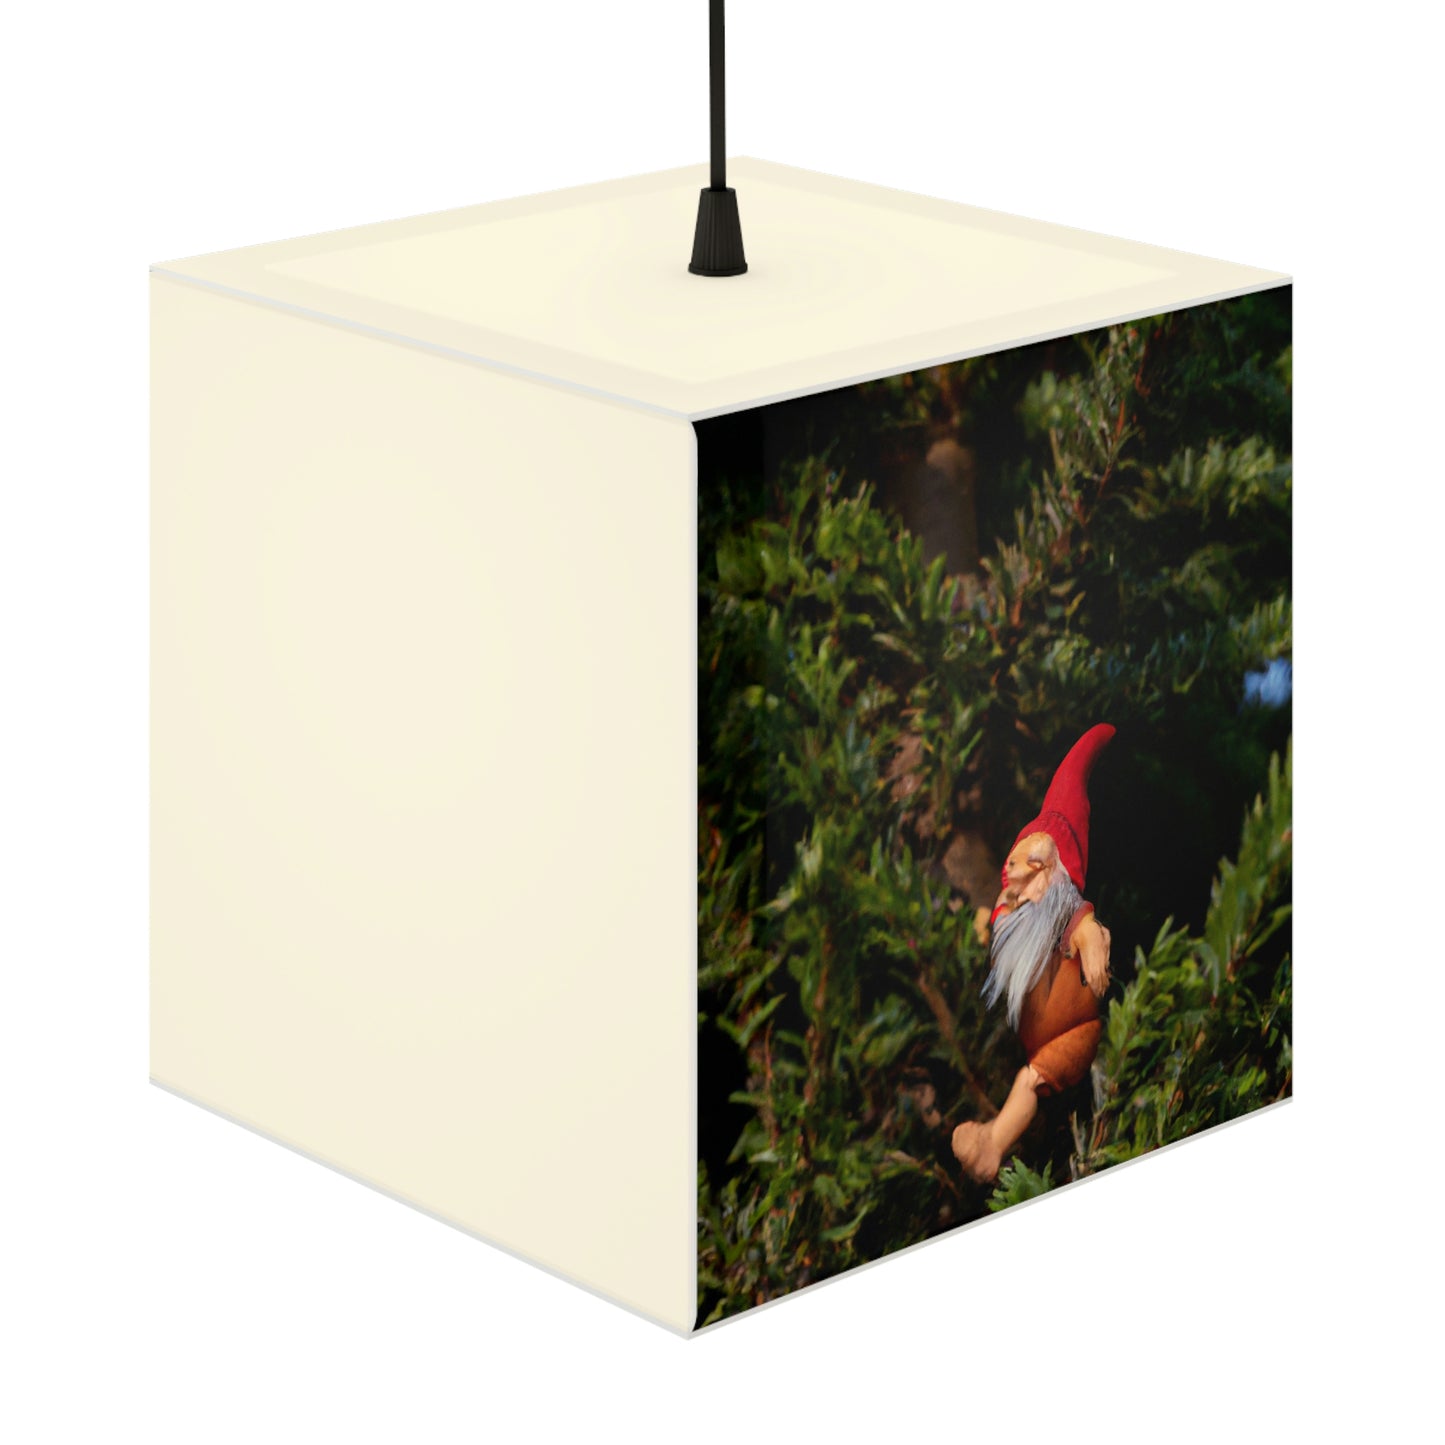 The Gnome's High-Rise Adventure - The Alien Light Cube Lamp